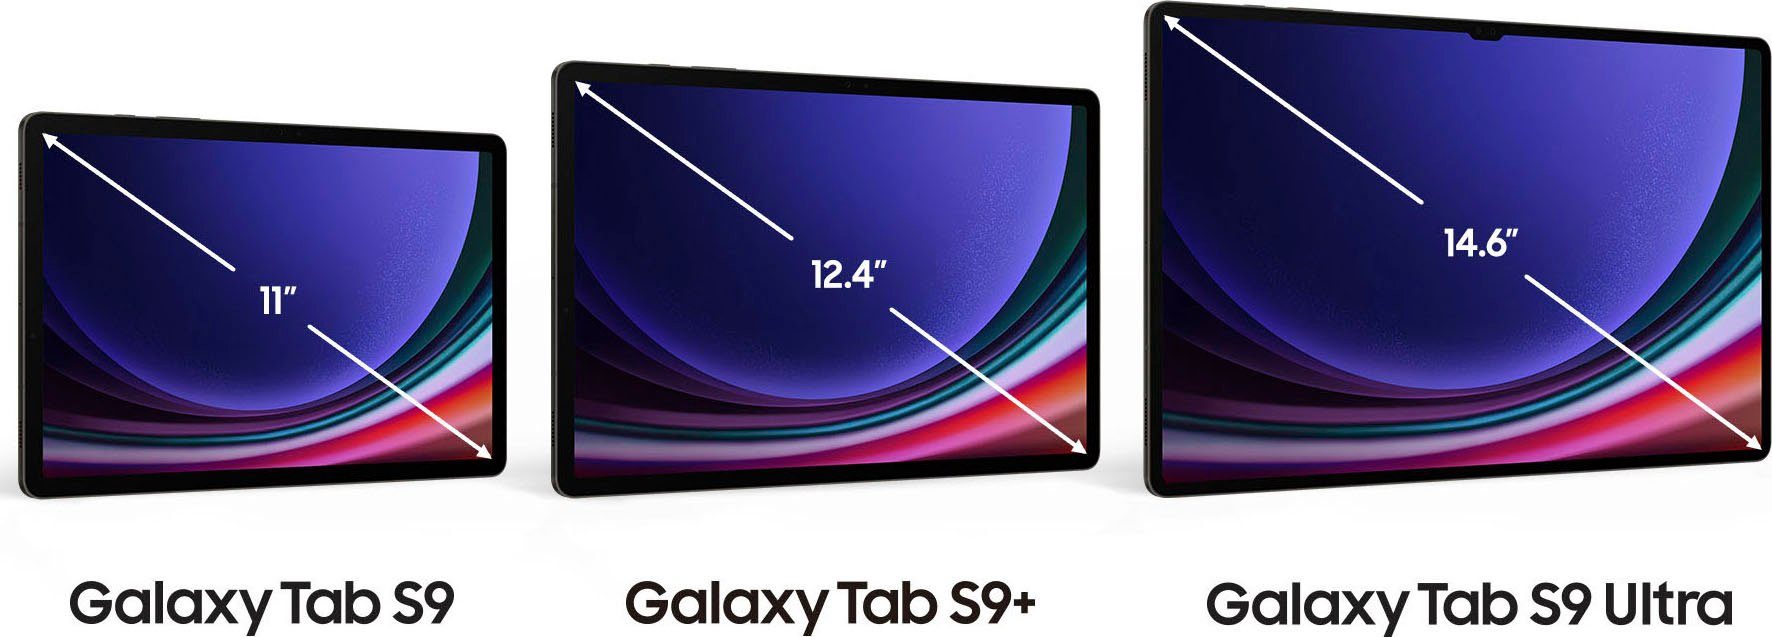 Tab (11", WiFi Galaxy 256 S9 GB, Samsung Tablet Graphite Android)